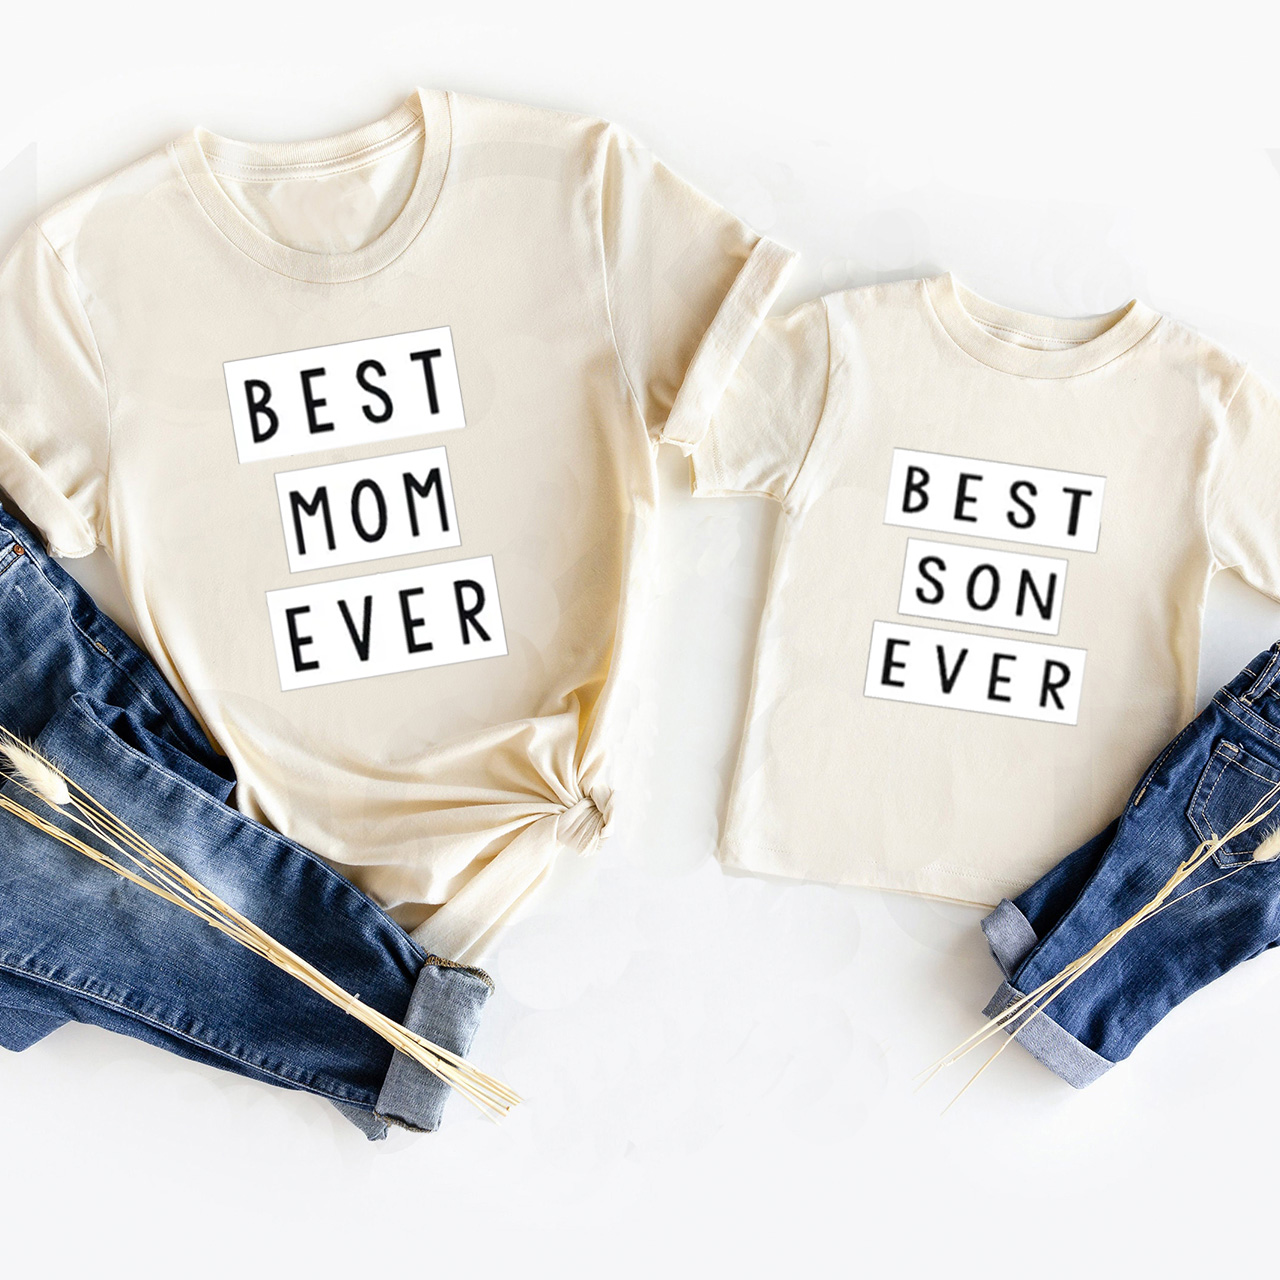 Best Mom Ever Matching Tees For Mother's Day